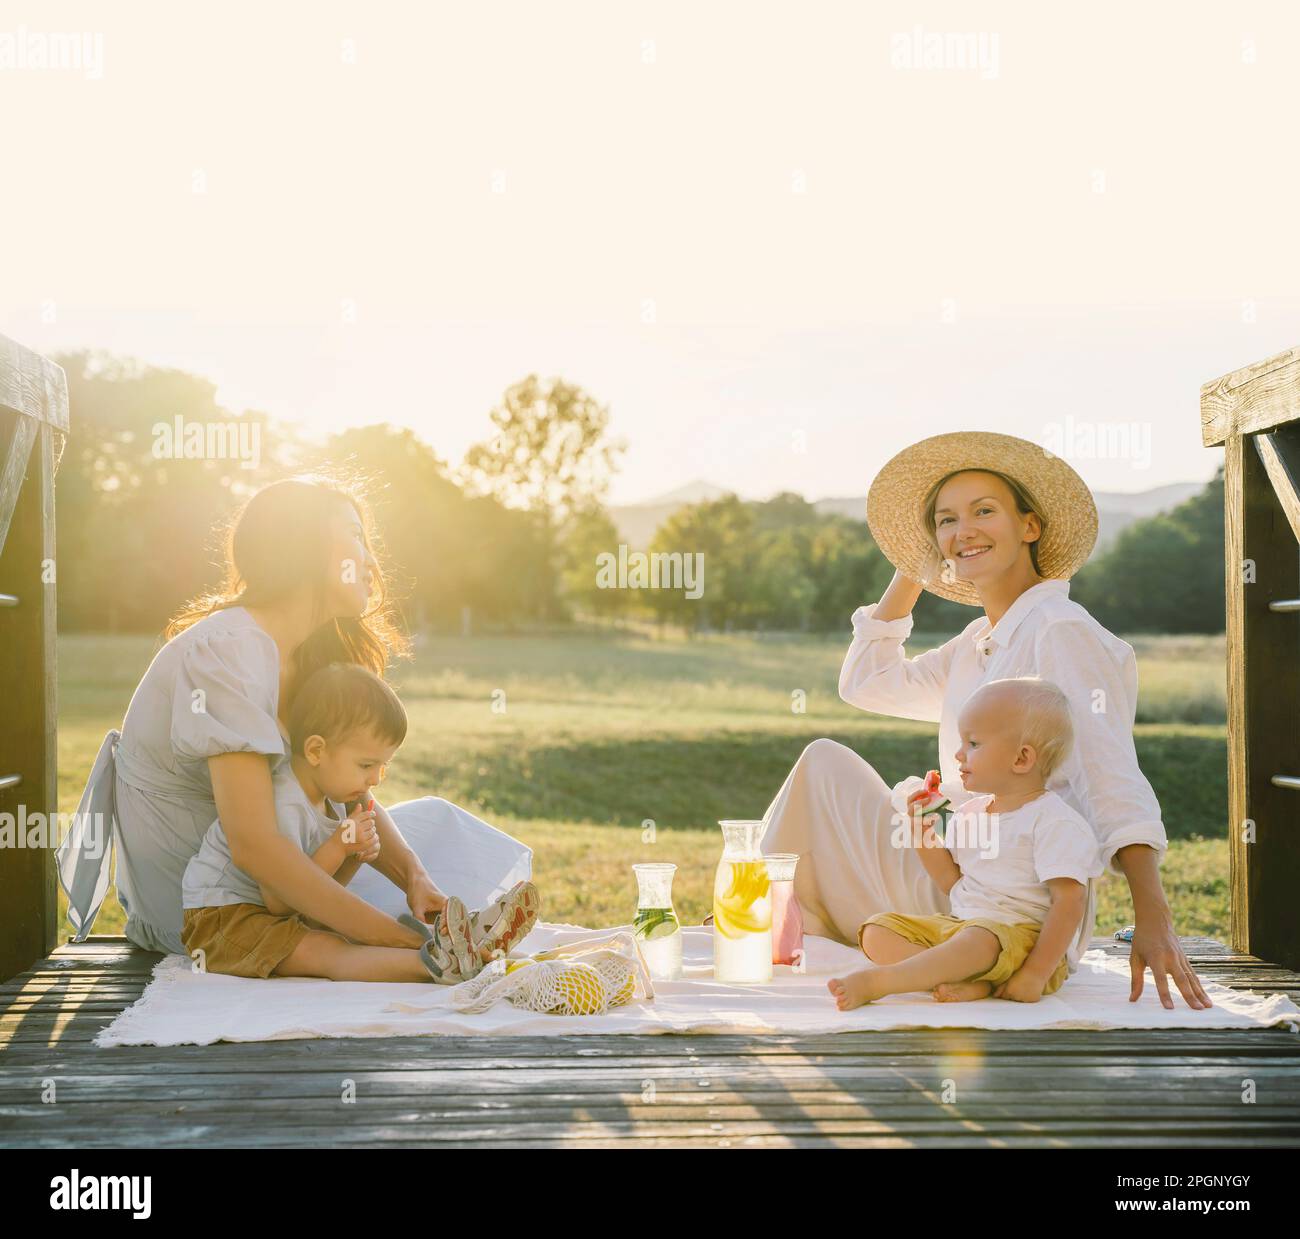 Smiling women with their sons spending time together at picnic Stock Photo